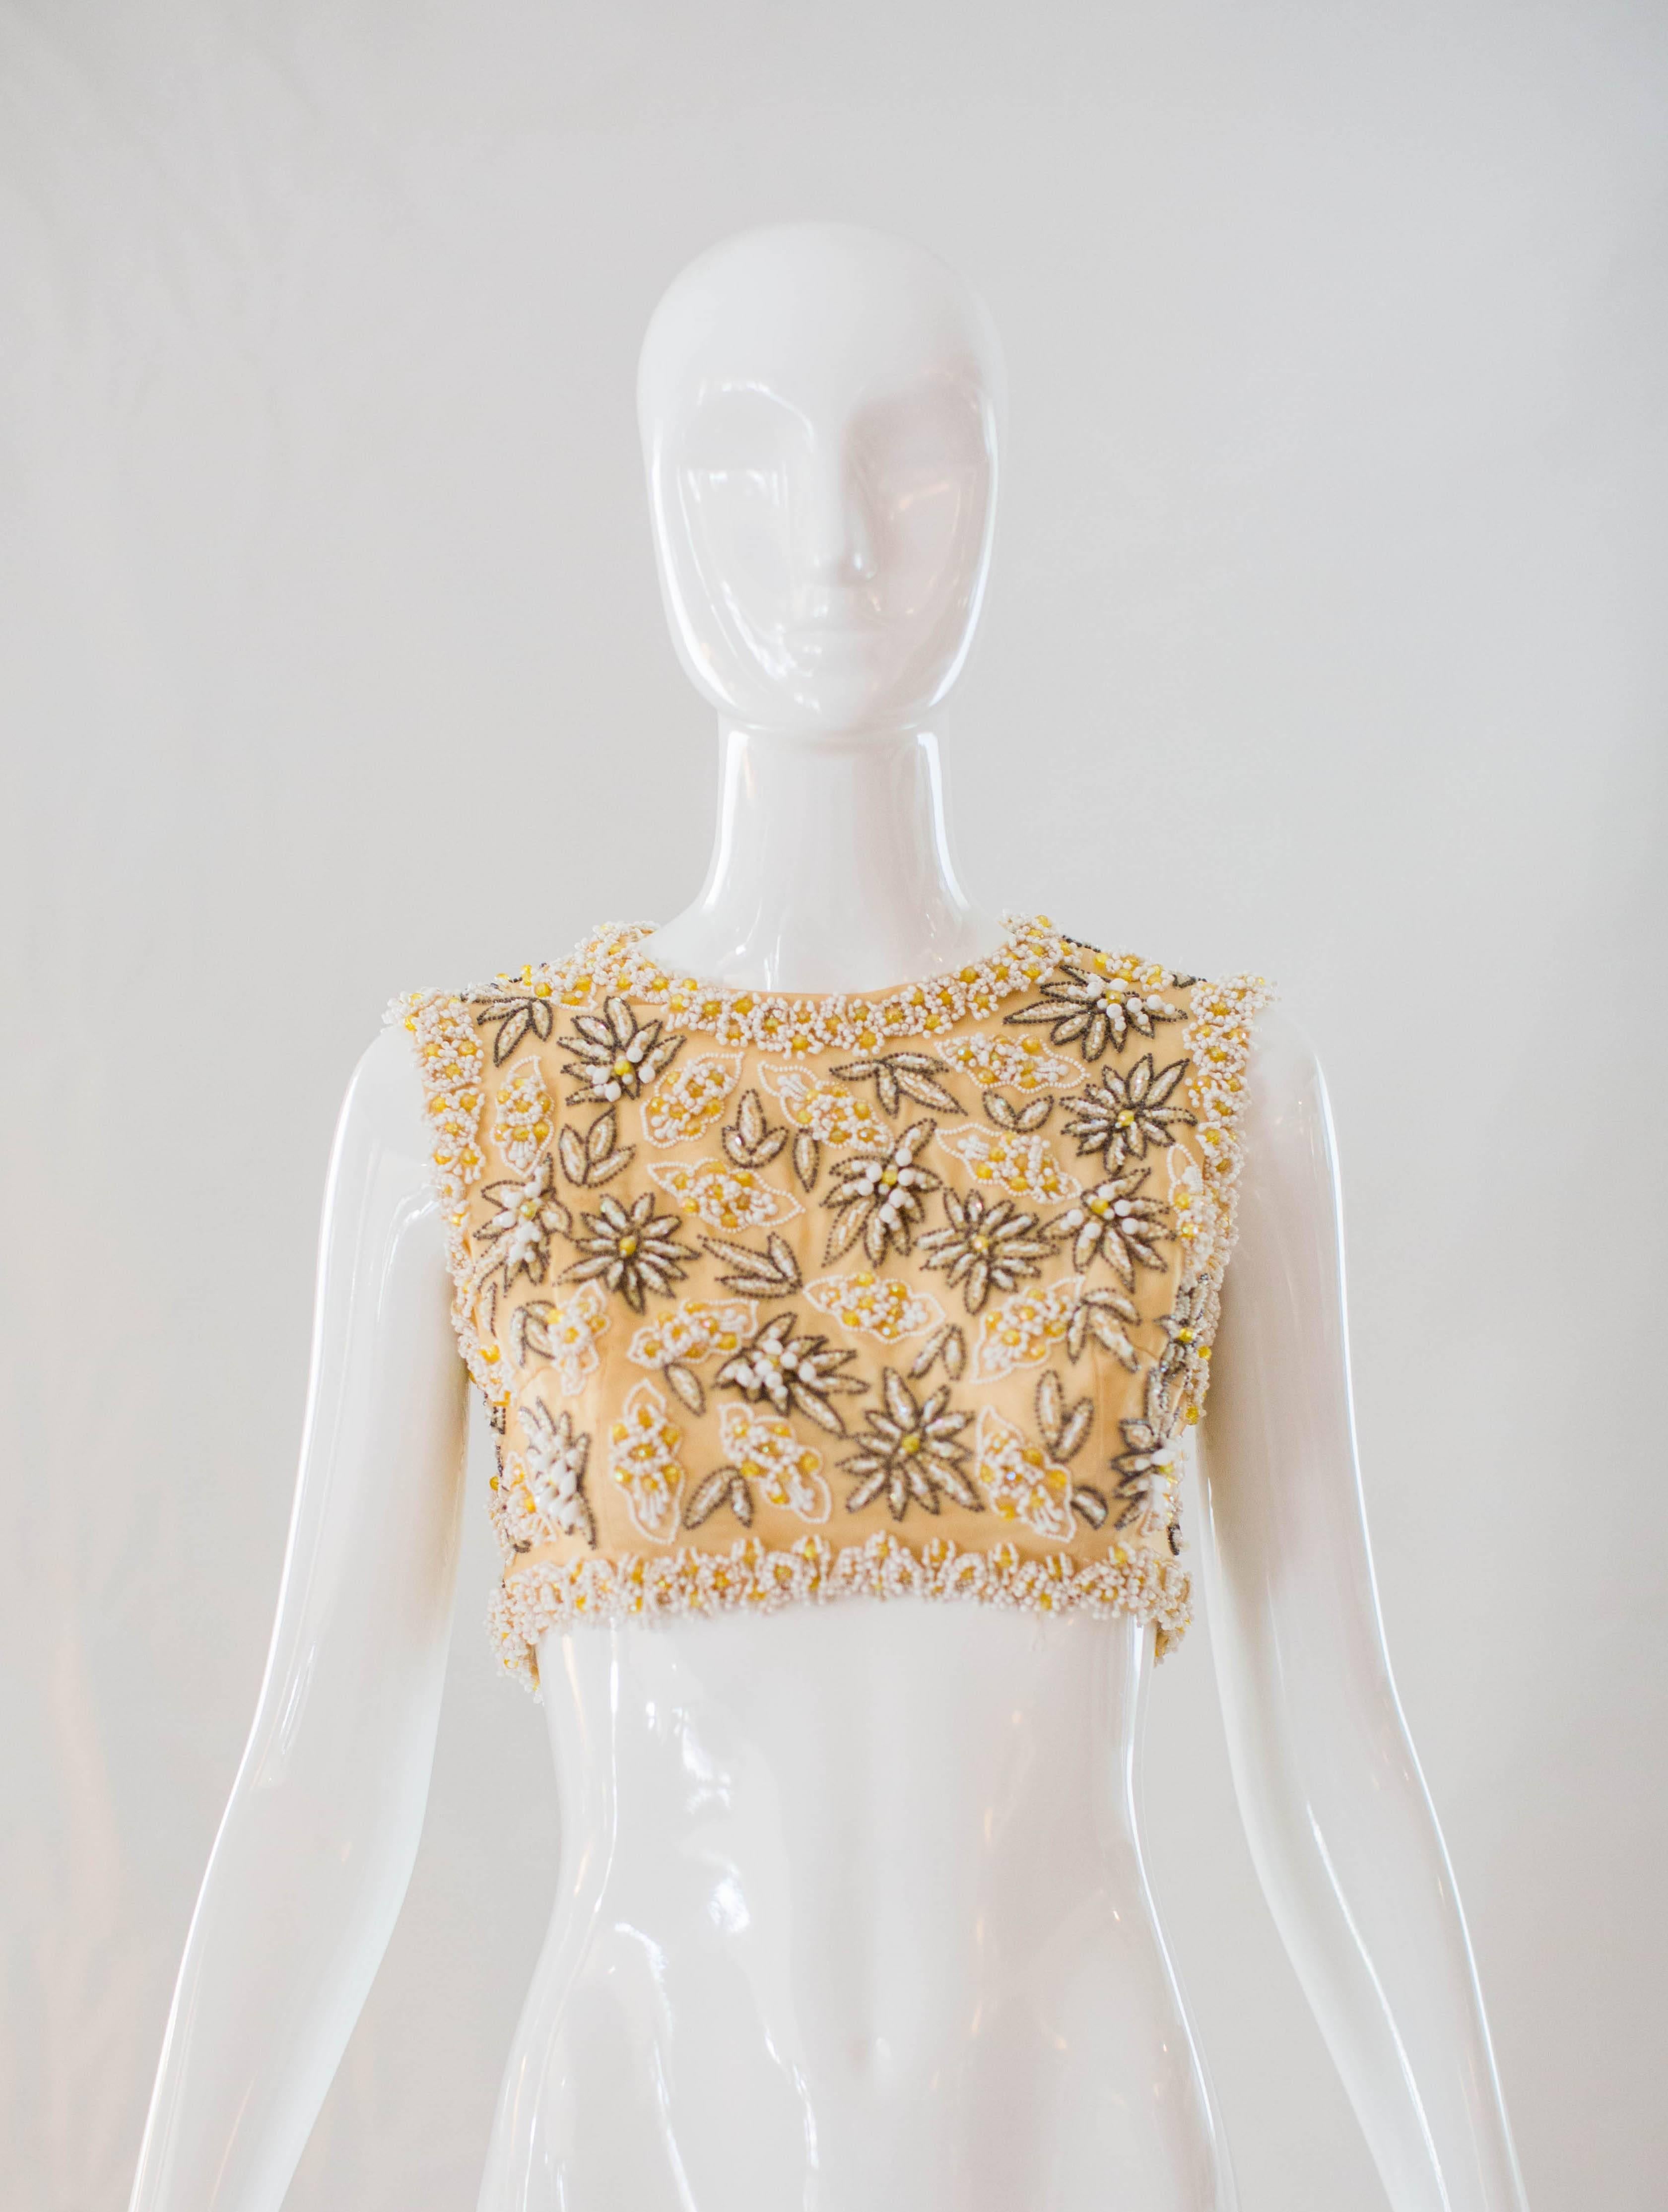 This stunning crop top is decorated with glass beaded details on shades of yellow, ivory and silver. Paired with high waisted pants or a full skirt, there are many different ways to style this statement stunner. The back features a hidden zipper